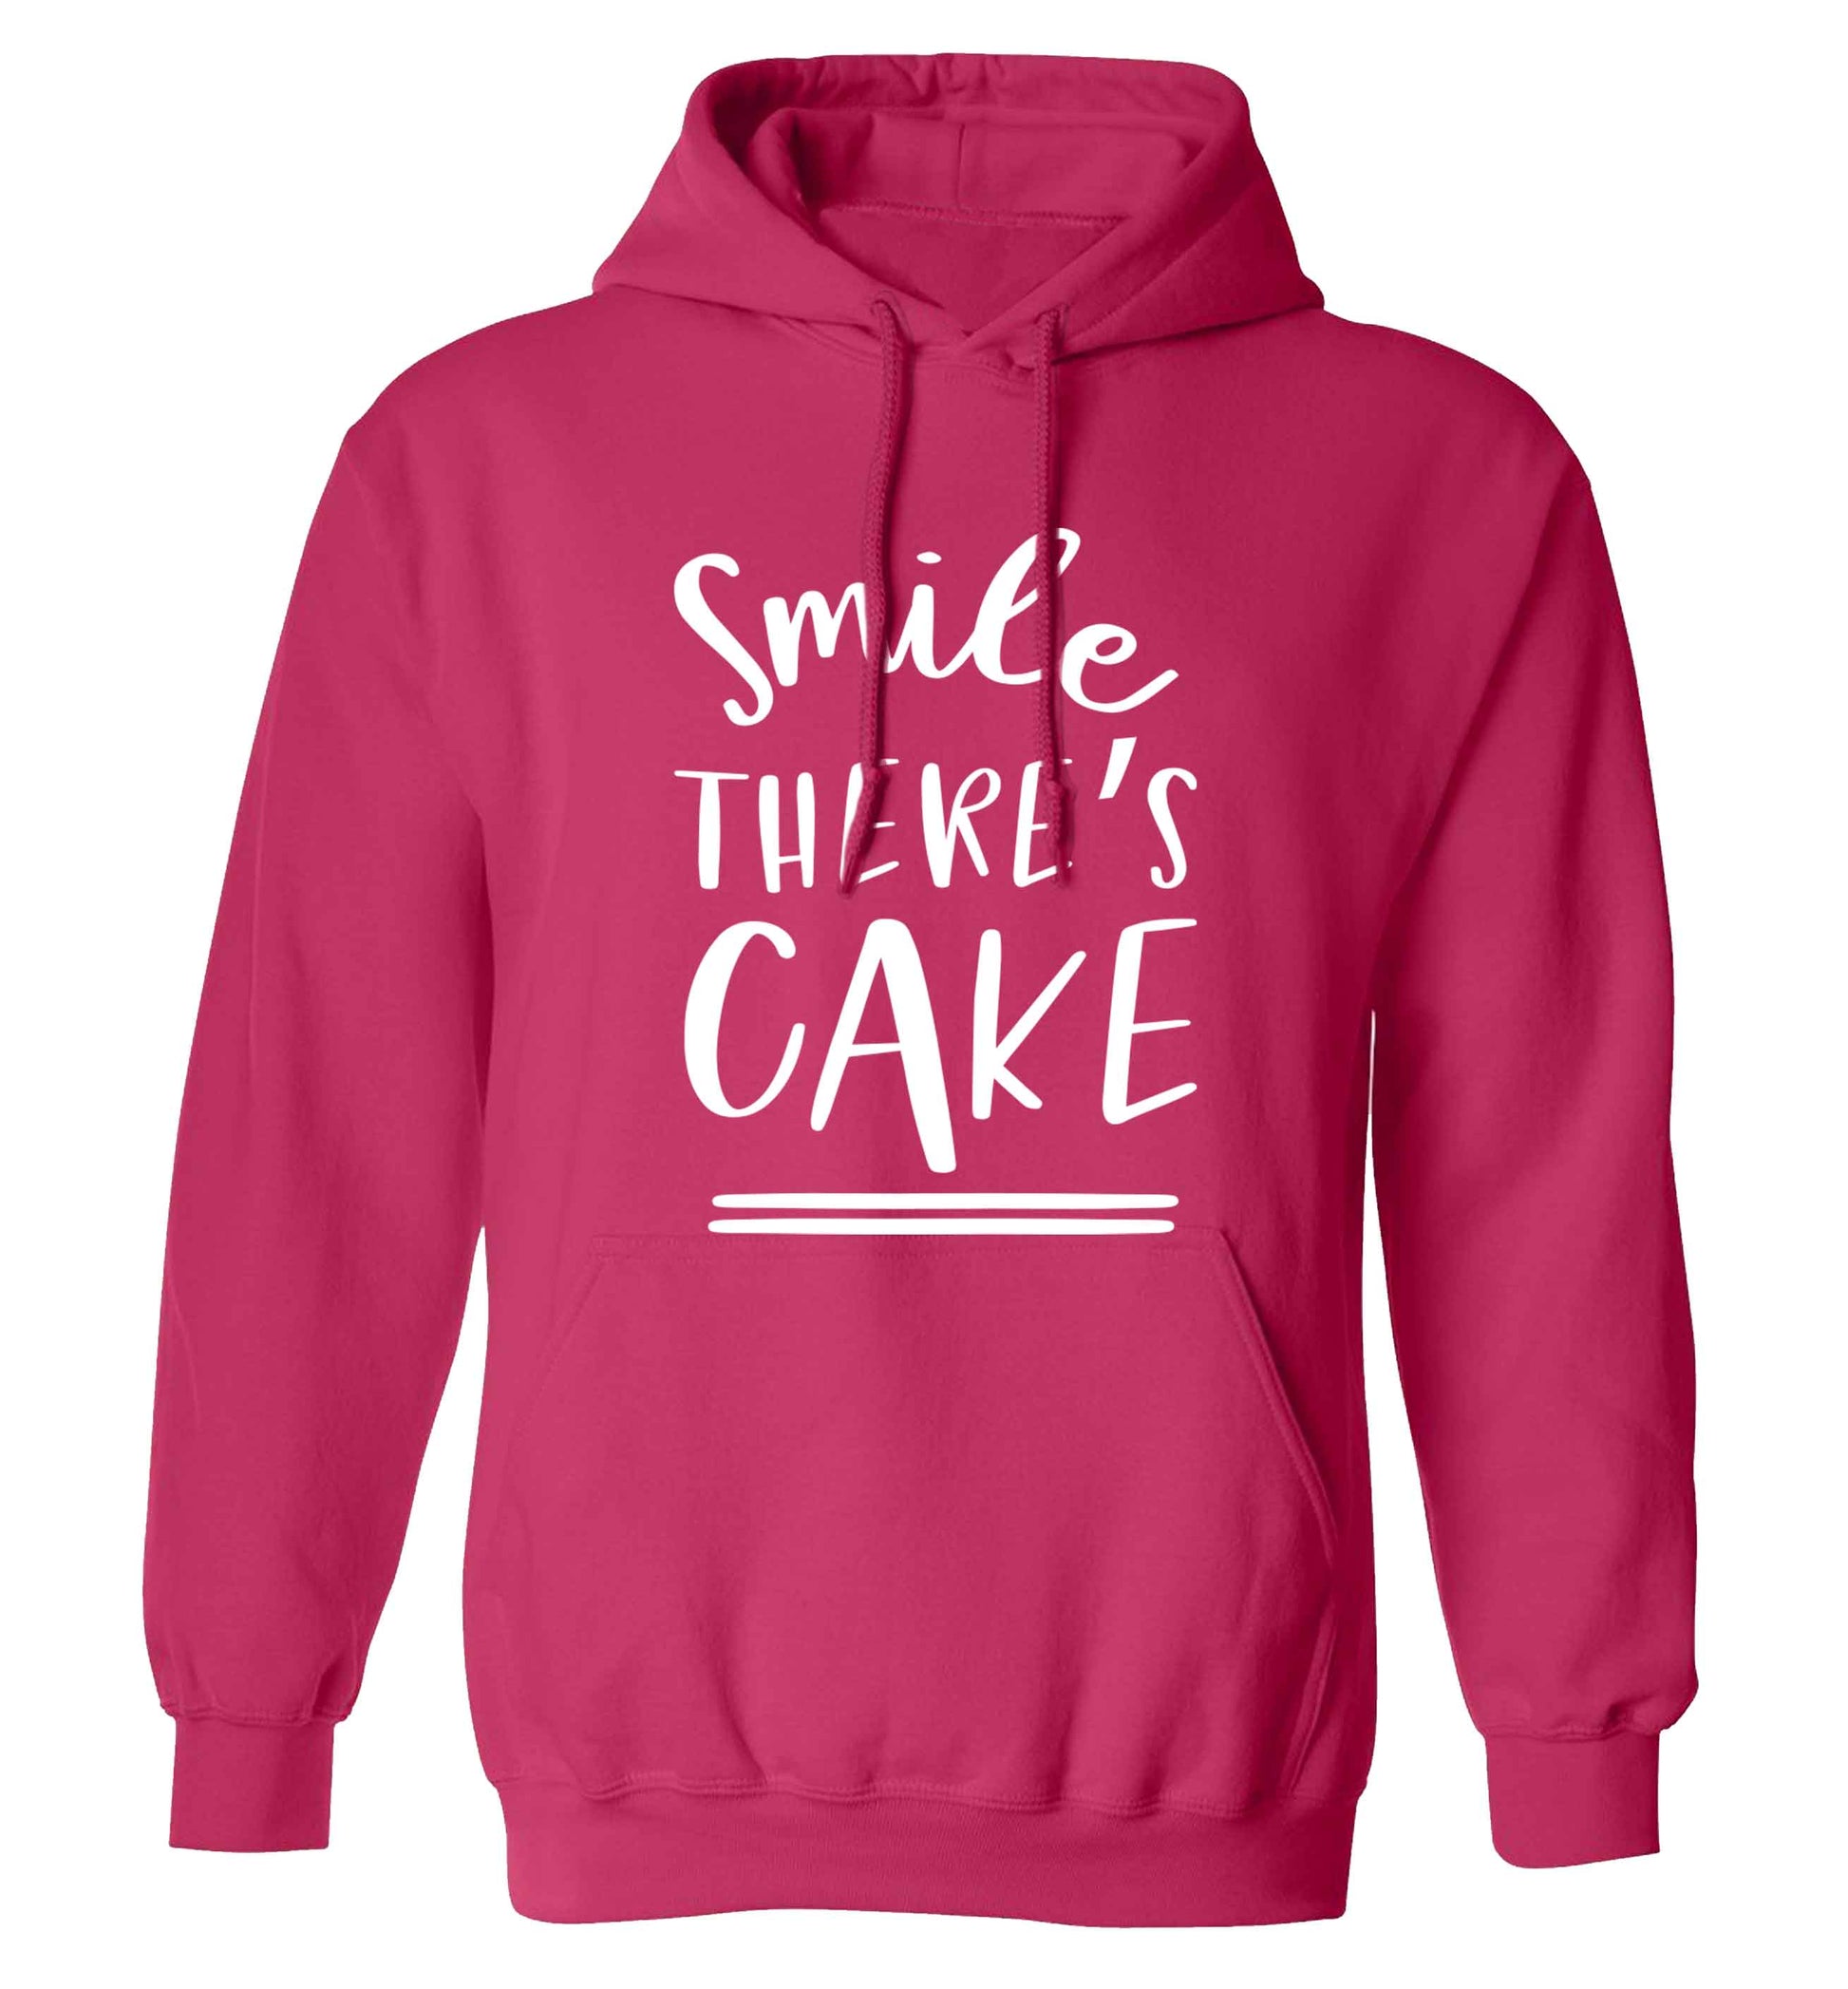 Smile there's cake adults unisex pink hoodie 2XL